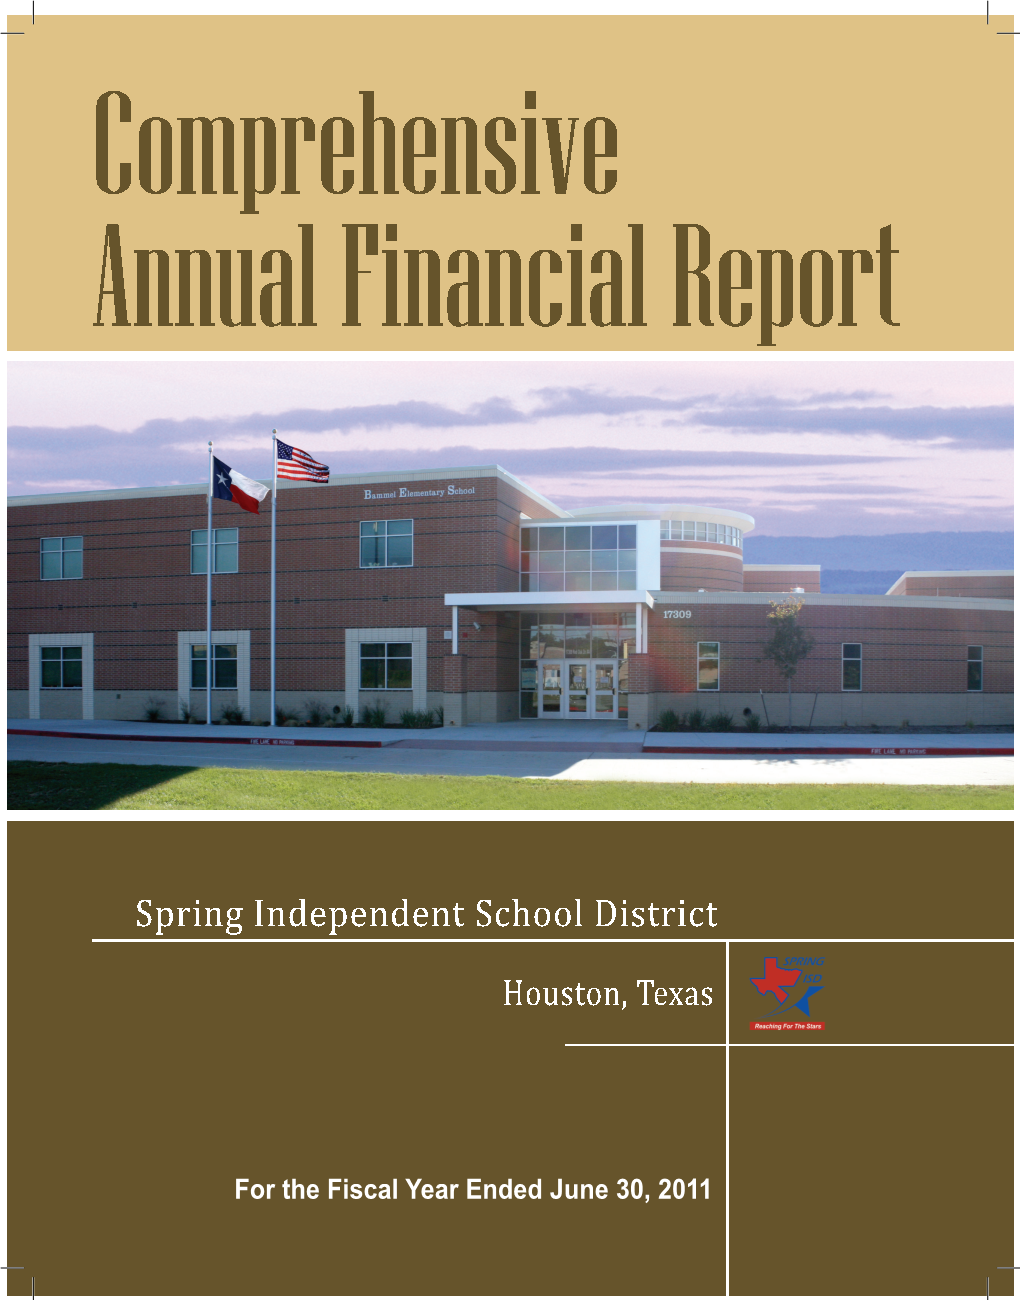 For the Fiscal Year Ended June 30, 2011